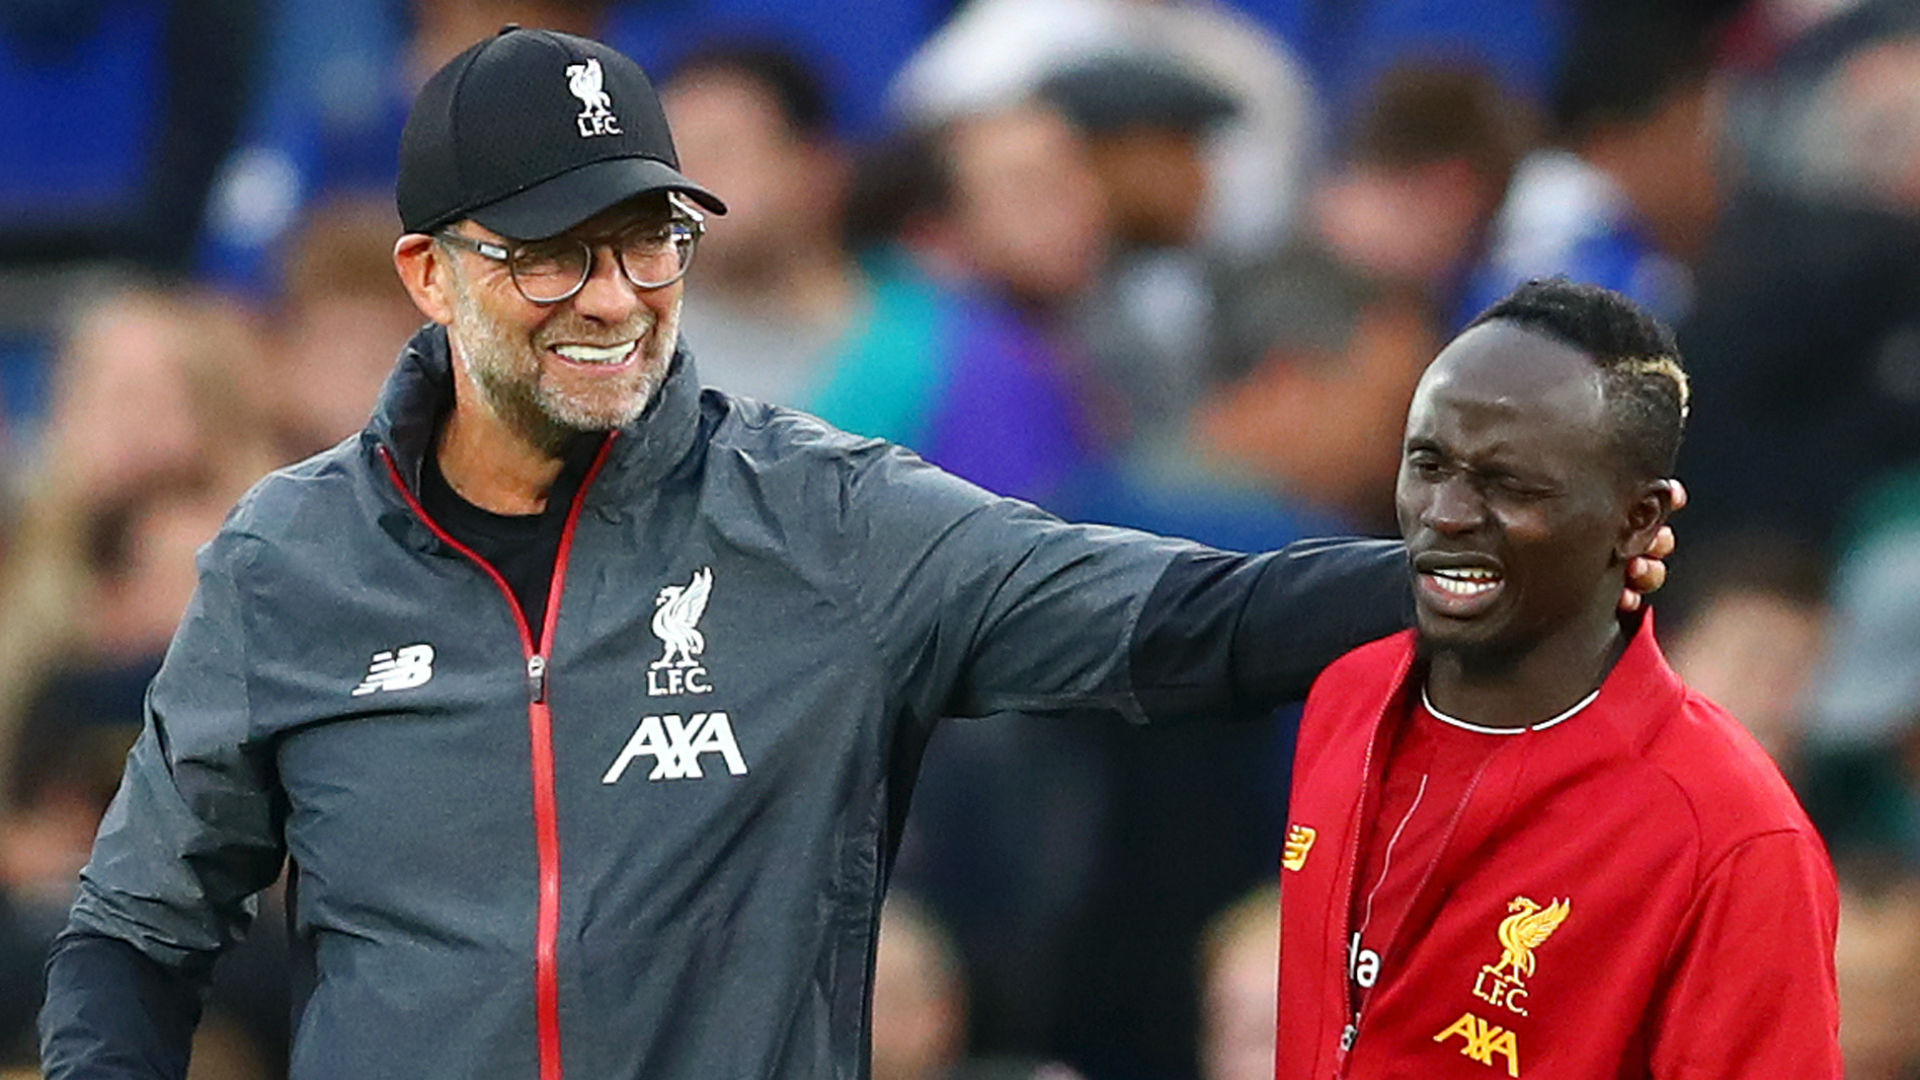 Liverpool are on firmly on course for the Premier League title and Sadio Mane has only just learned the achievement would land him a medal.